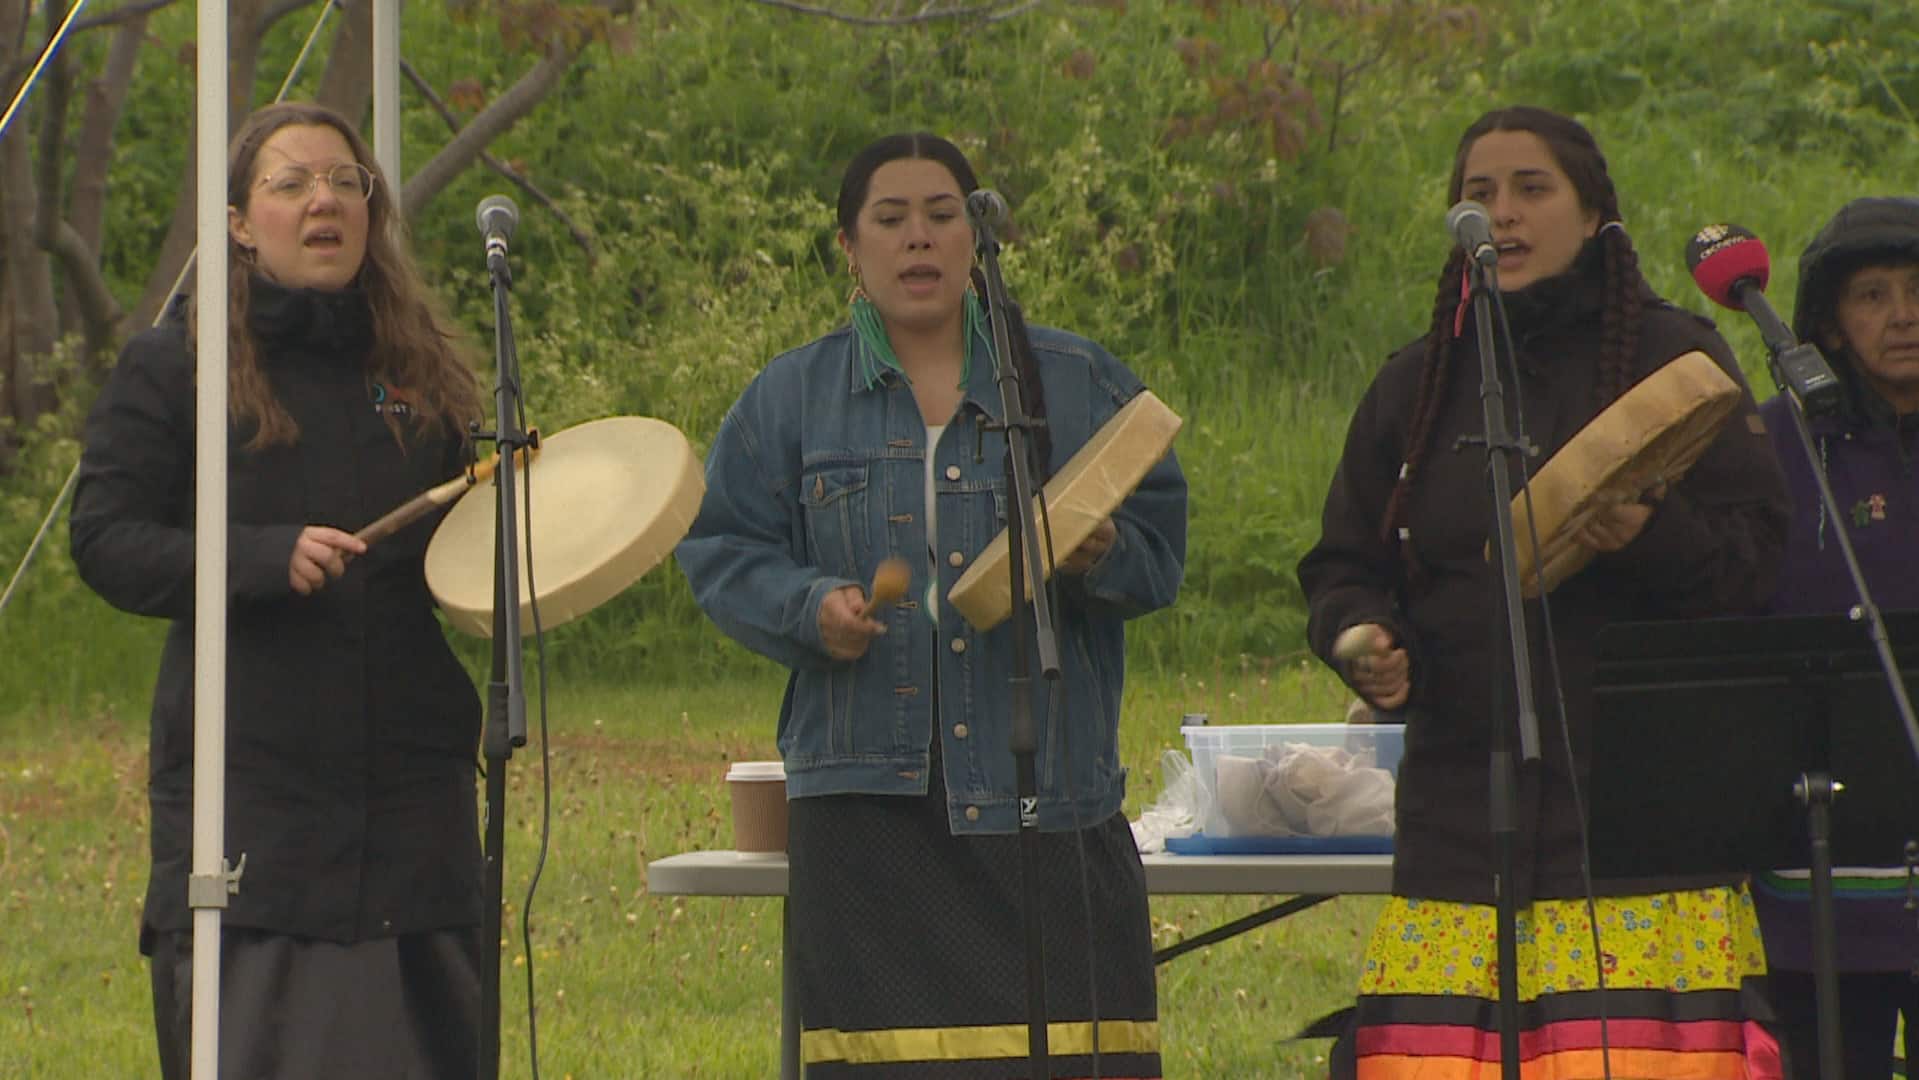 national indigenous peoples day kicks off with sunrise ceremony in st johns 1